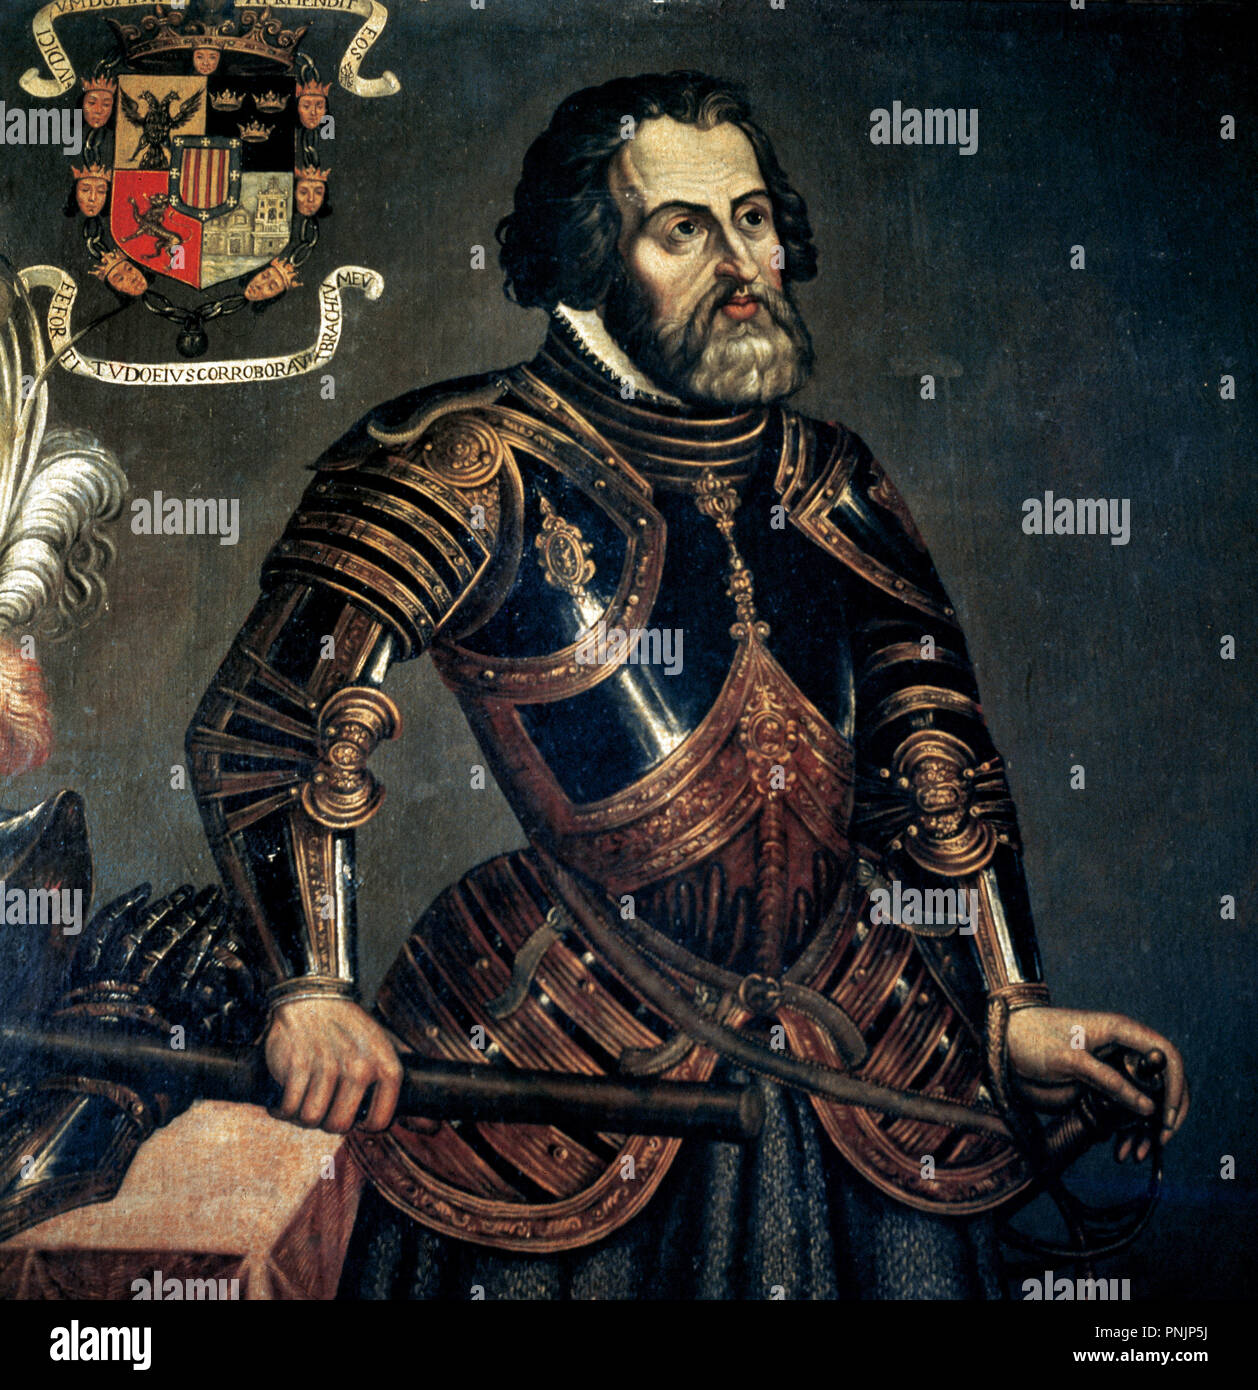 Hernan Cortes, 1st Marquis of the Valley of Oaxaca (1485Ð1547). Spanish conqueror. Anonymus portrait. Stock Photo